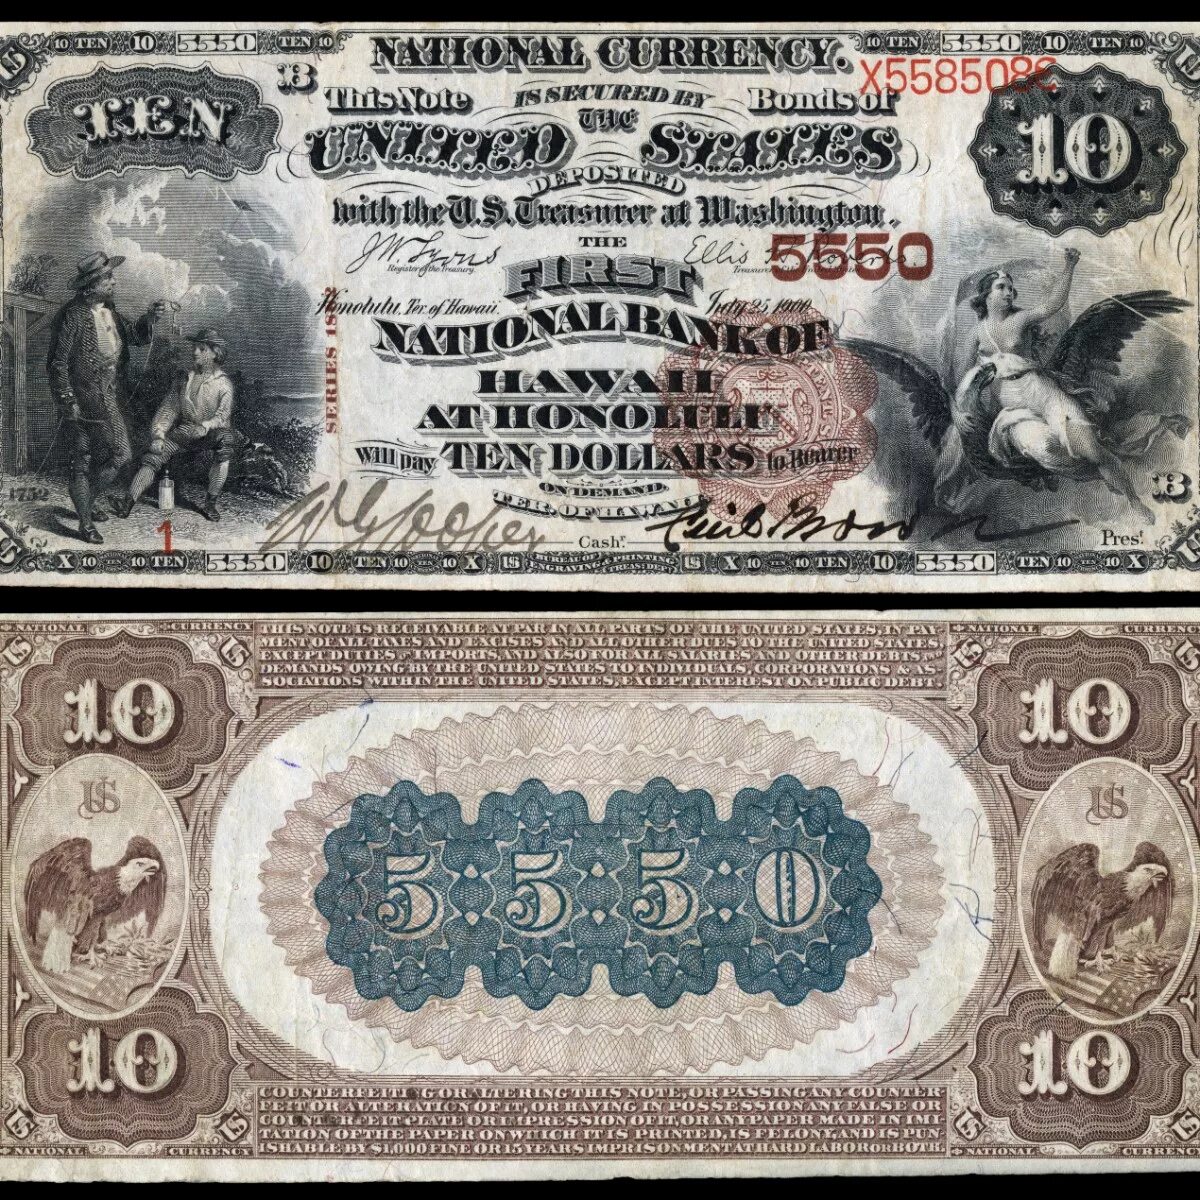 0 currencies. $10 1882 National Bank Notes Territory of Alaska. $10 1892 Рjuneau, Territory of Alaska Banknotes. National Bank Note Fort Wayne Indiana 10 Dollars 1929. Orlando paper money show.